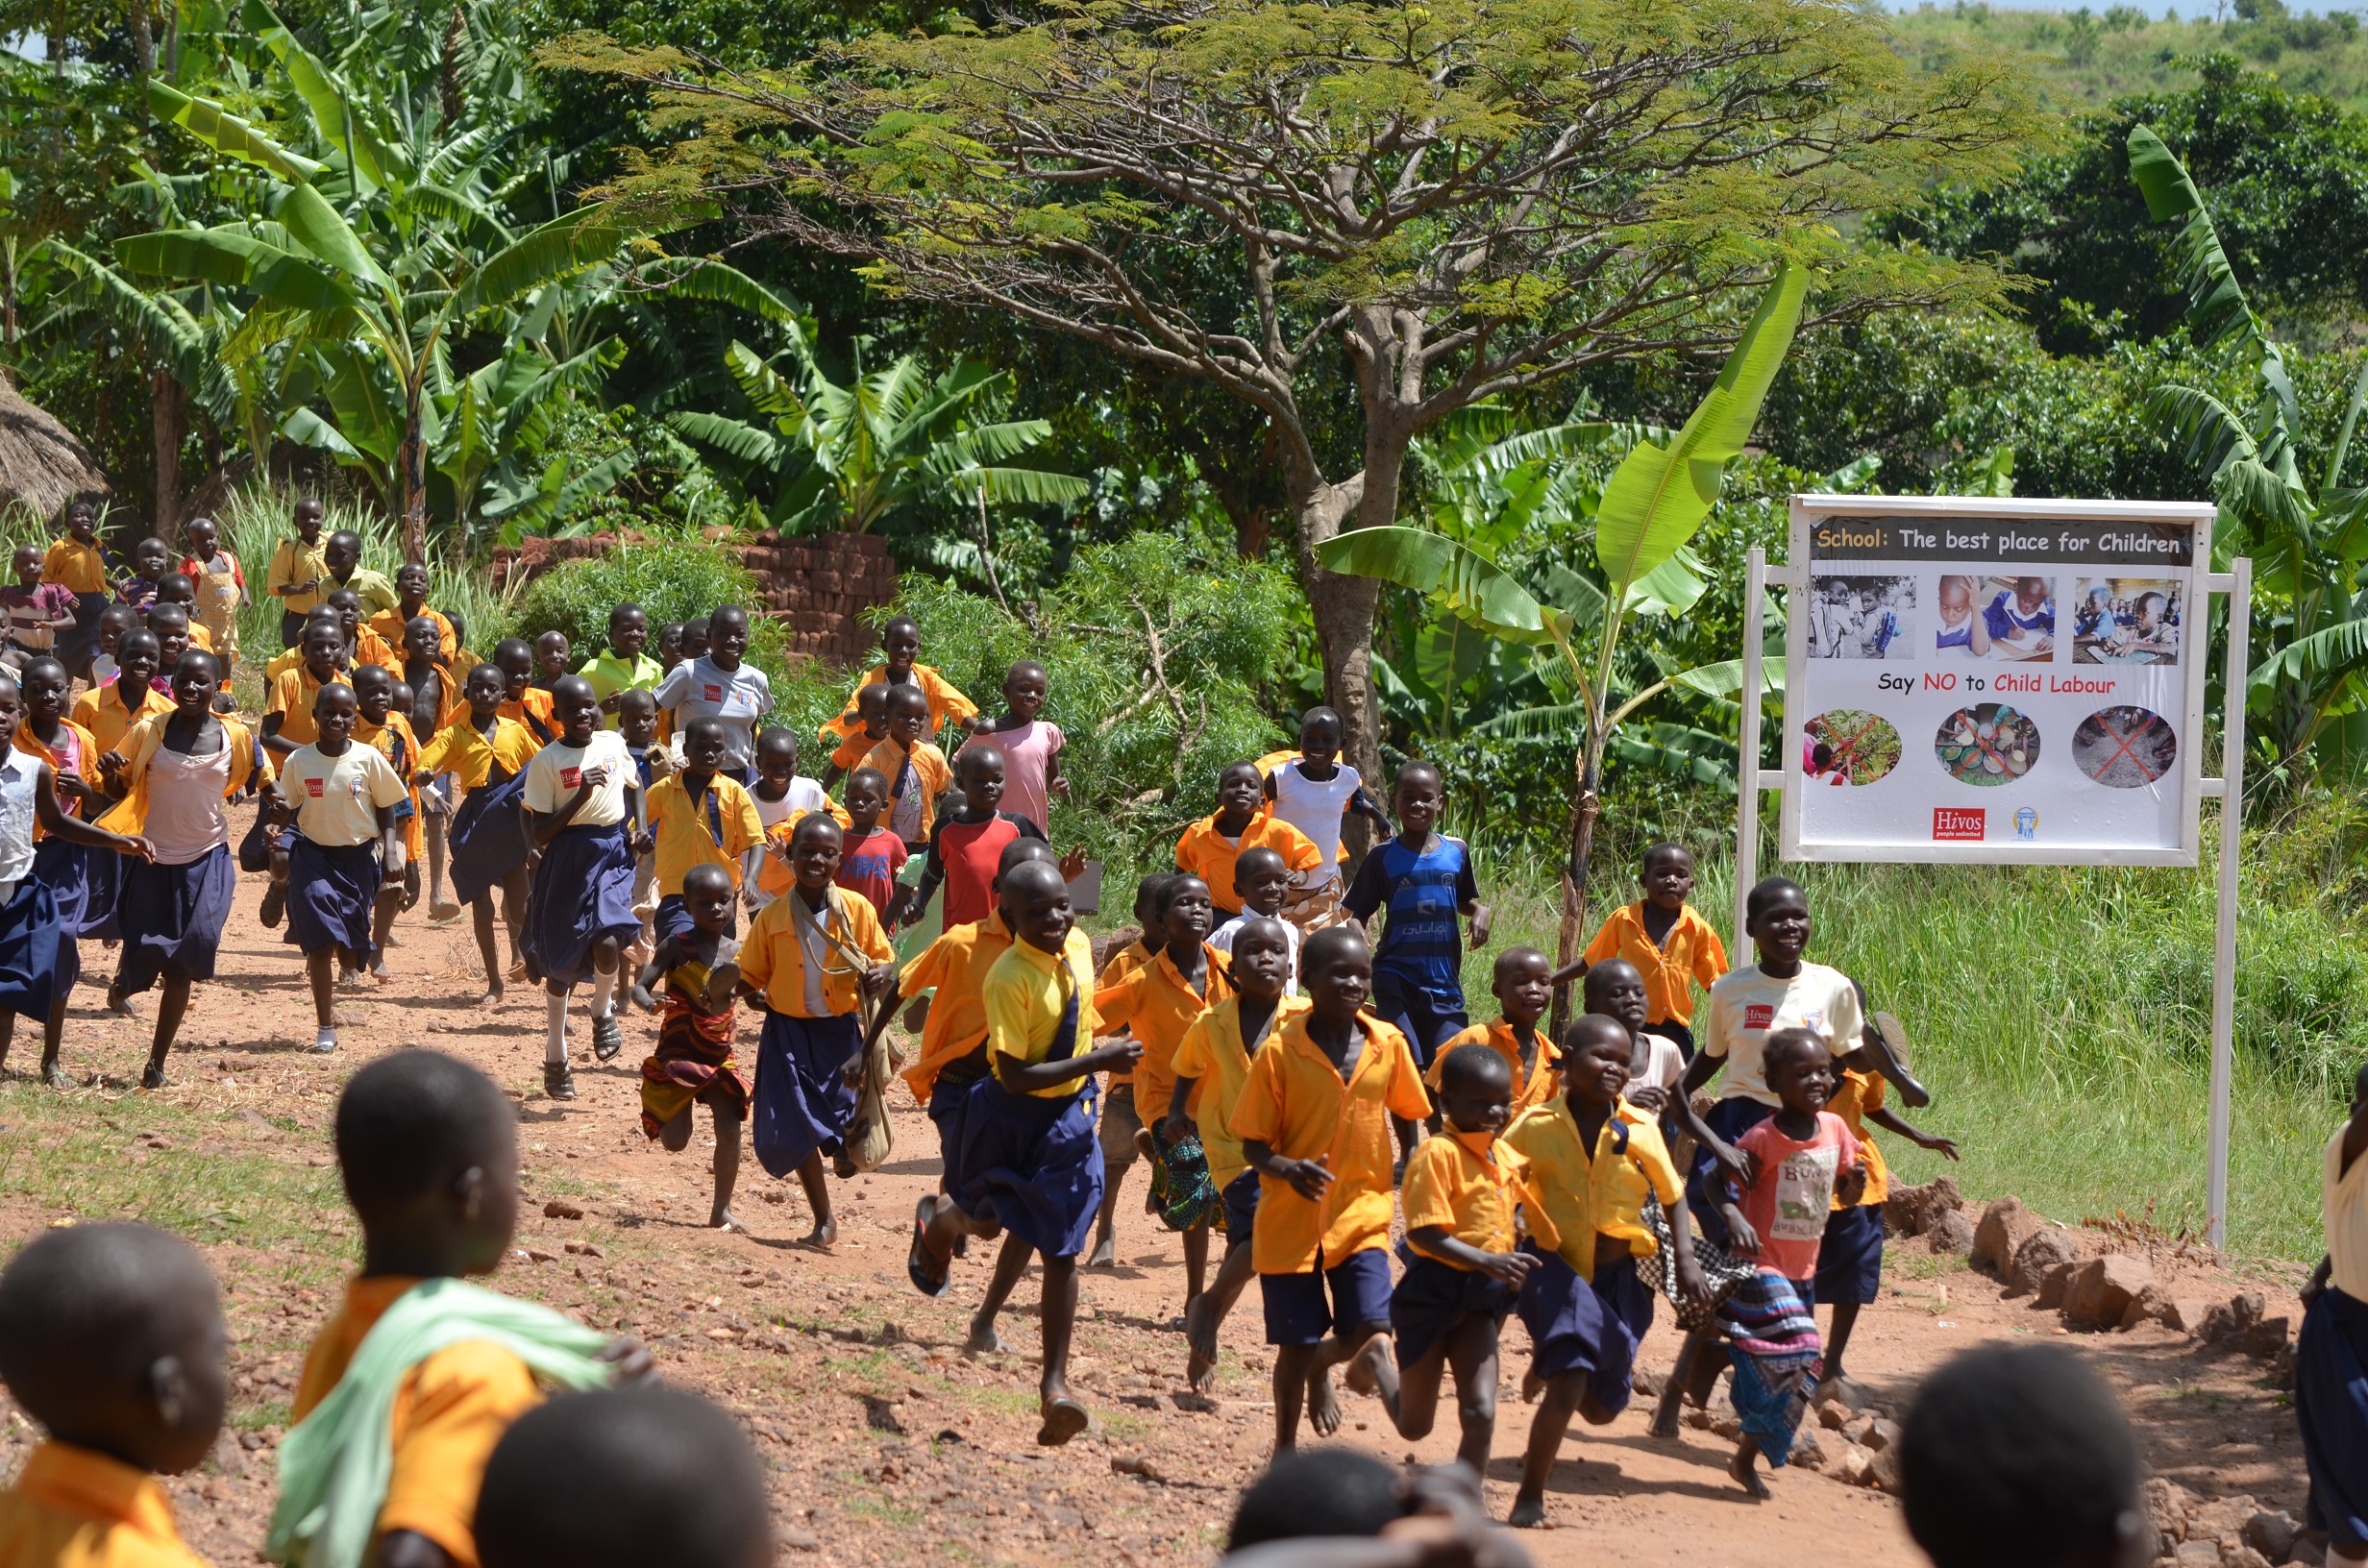 Results and Insights from the Child Labor Free Zone Program in West Nile, Uganda